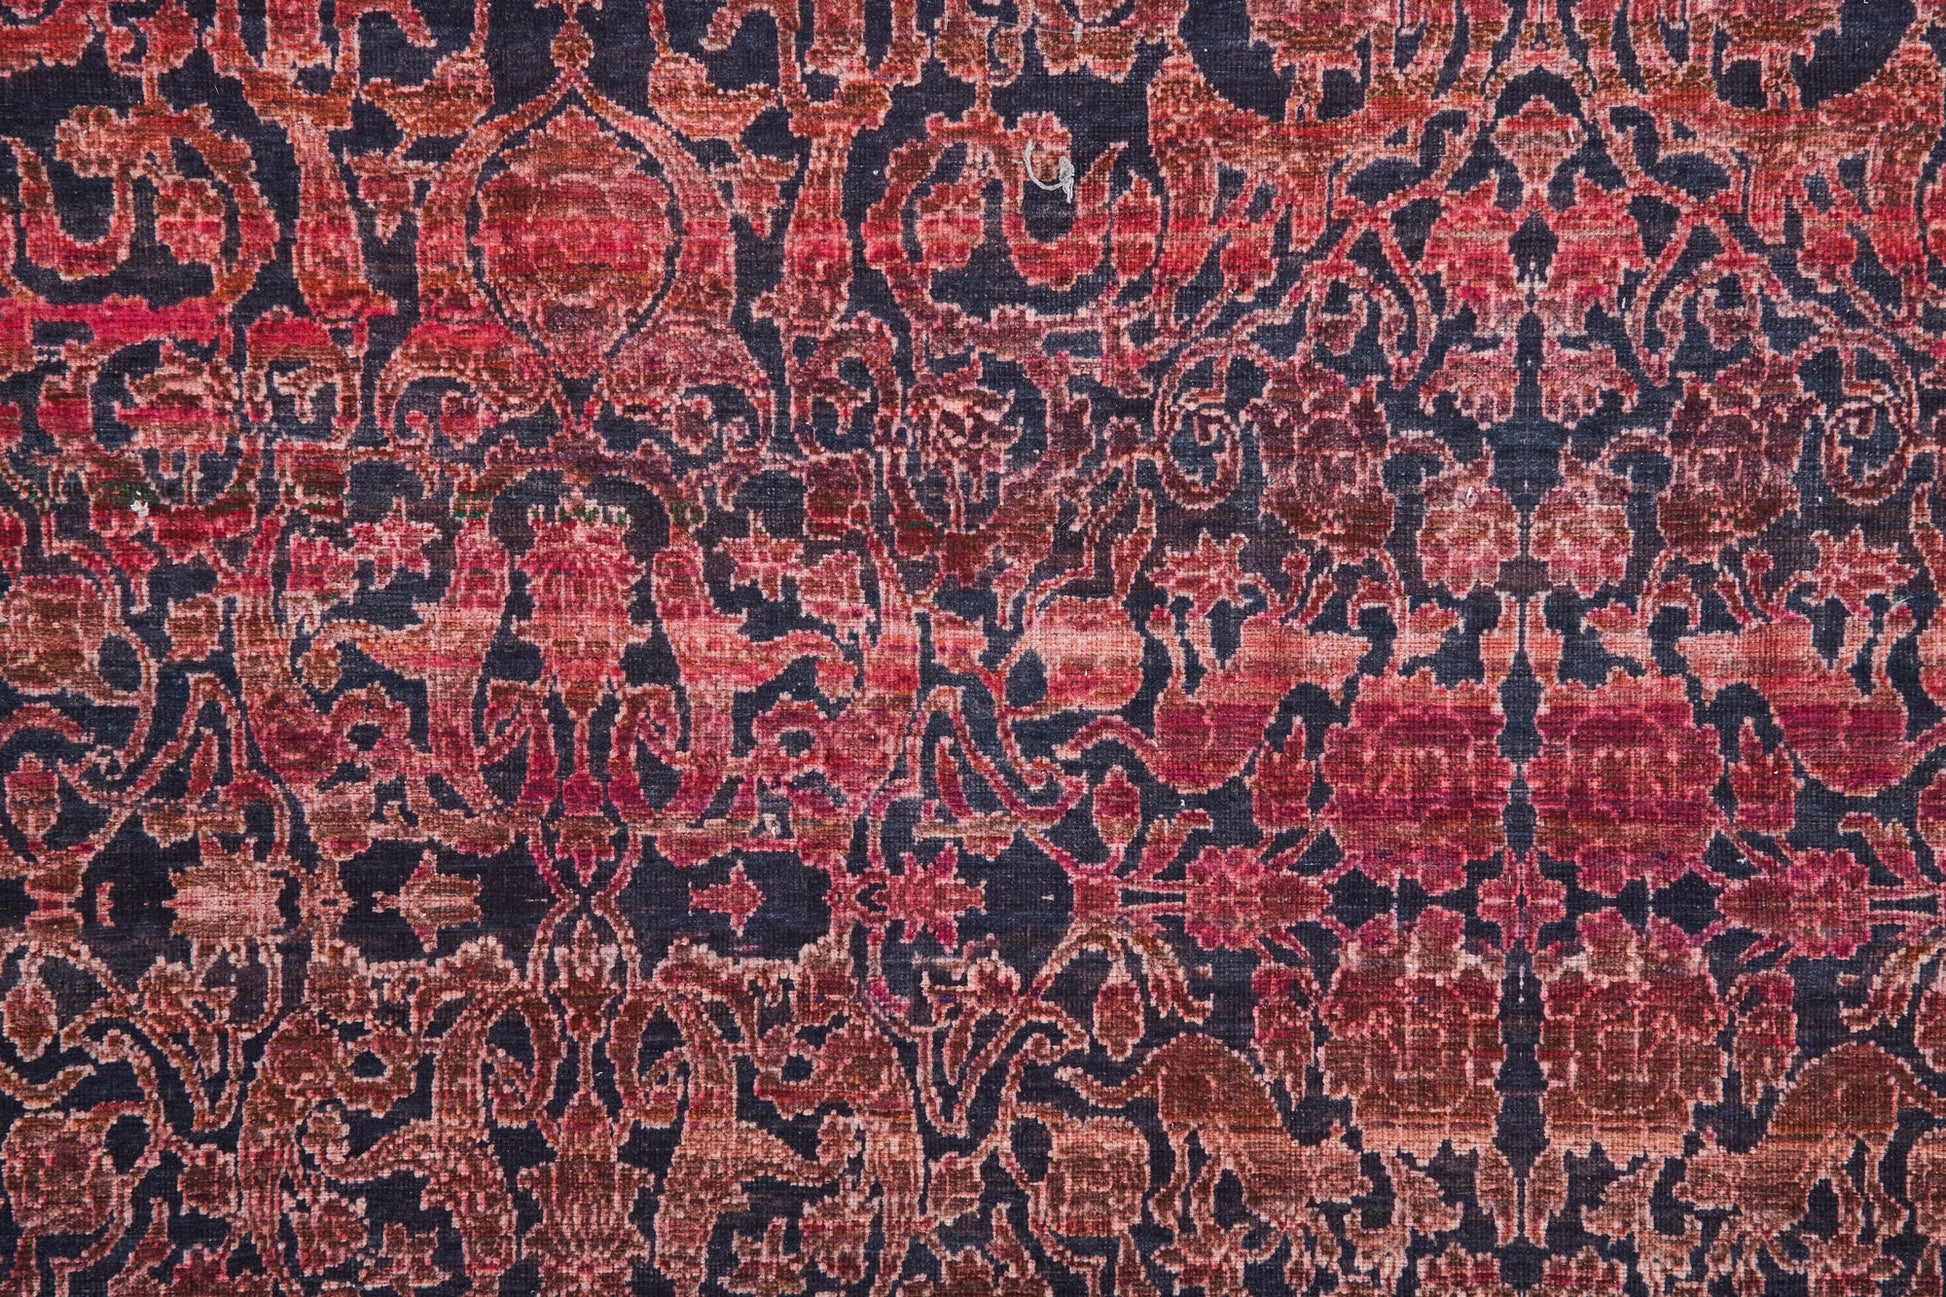 Feizy Voss Vos39Hcf Orange/Red/Gray Area Rug